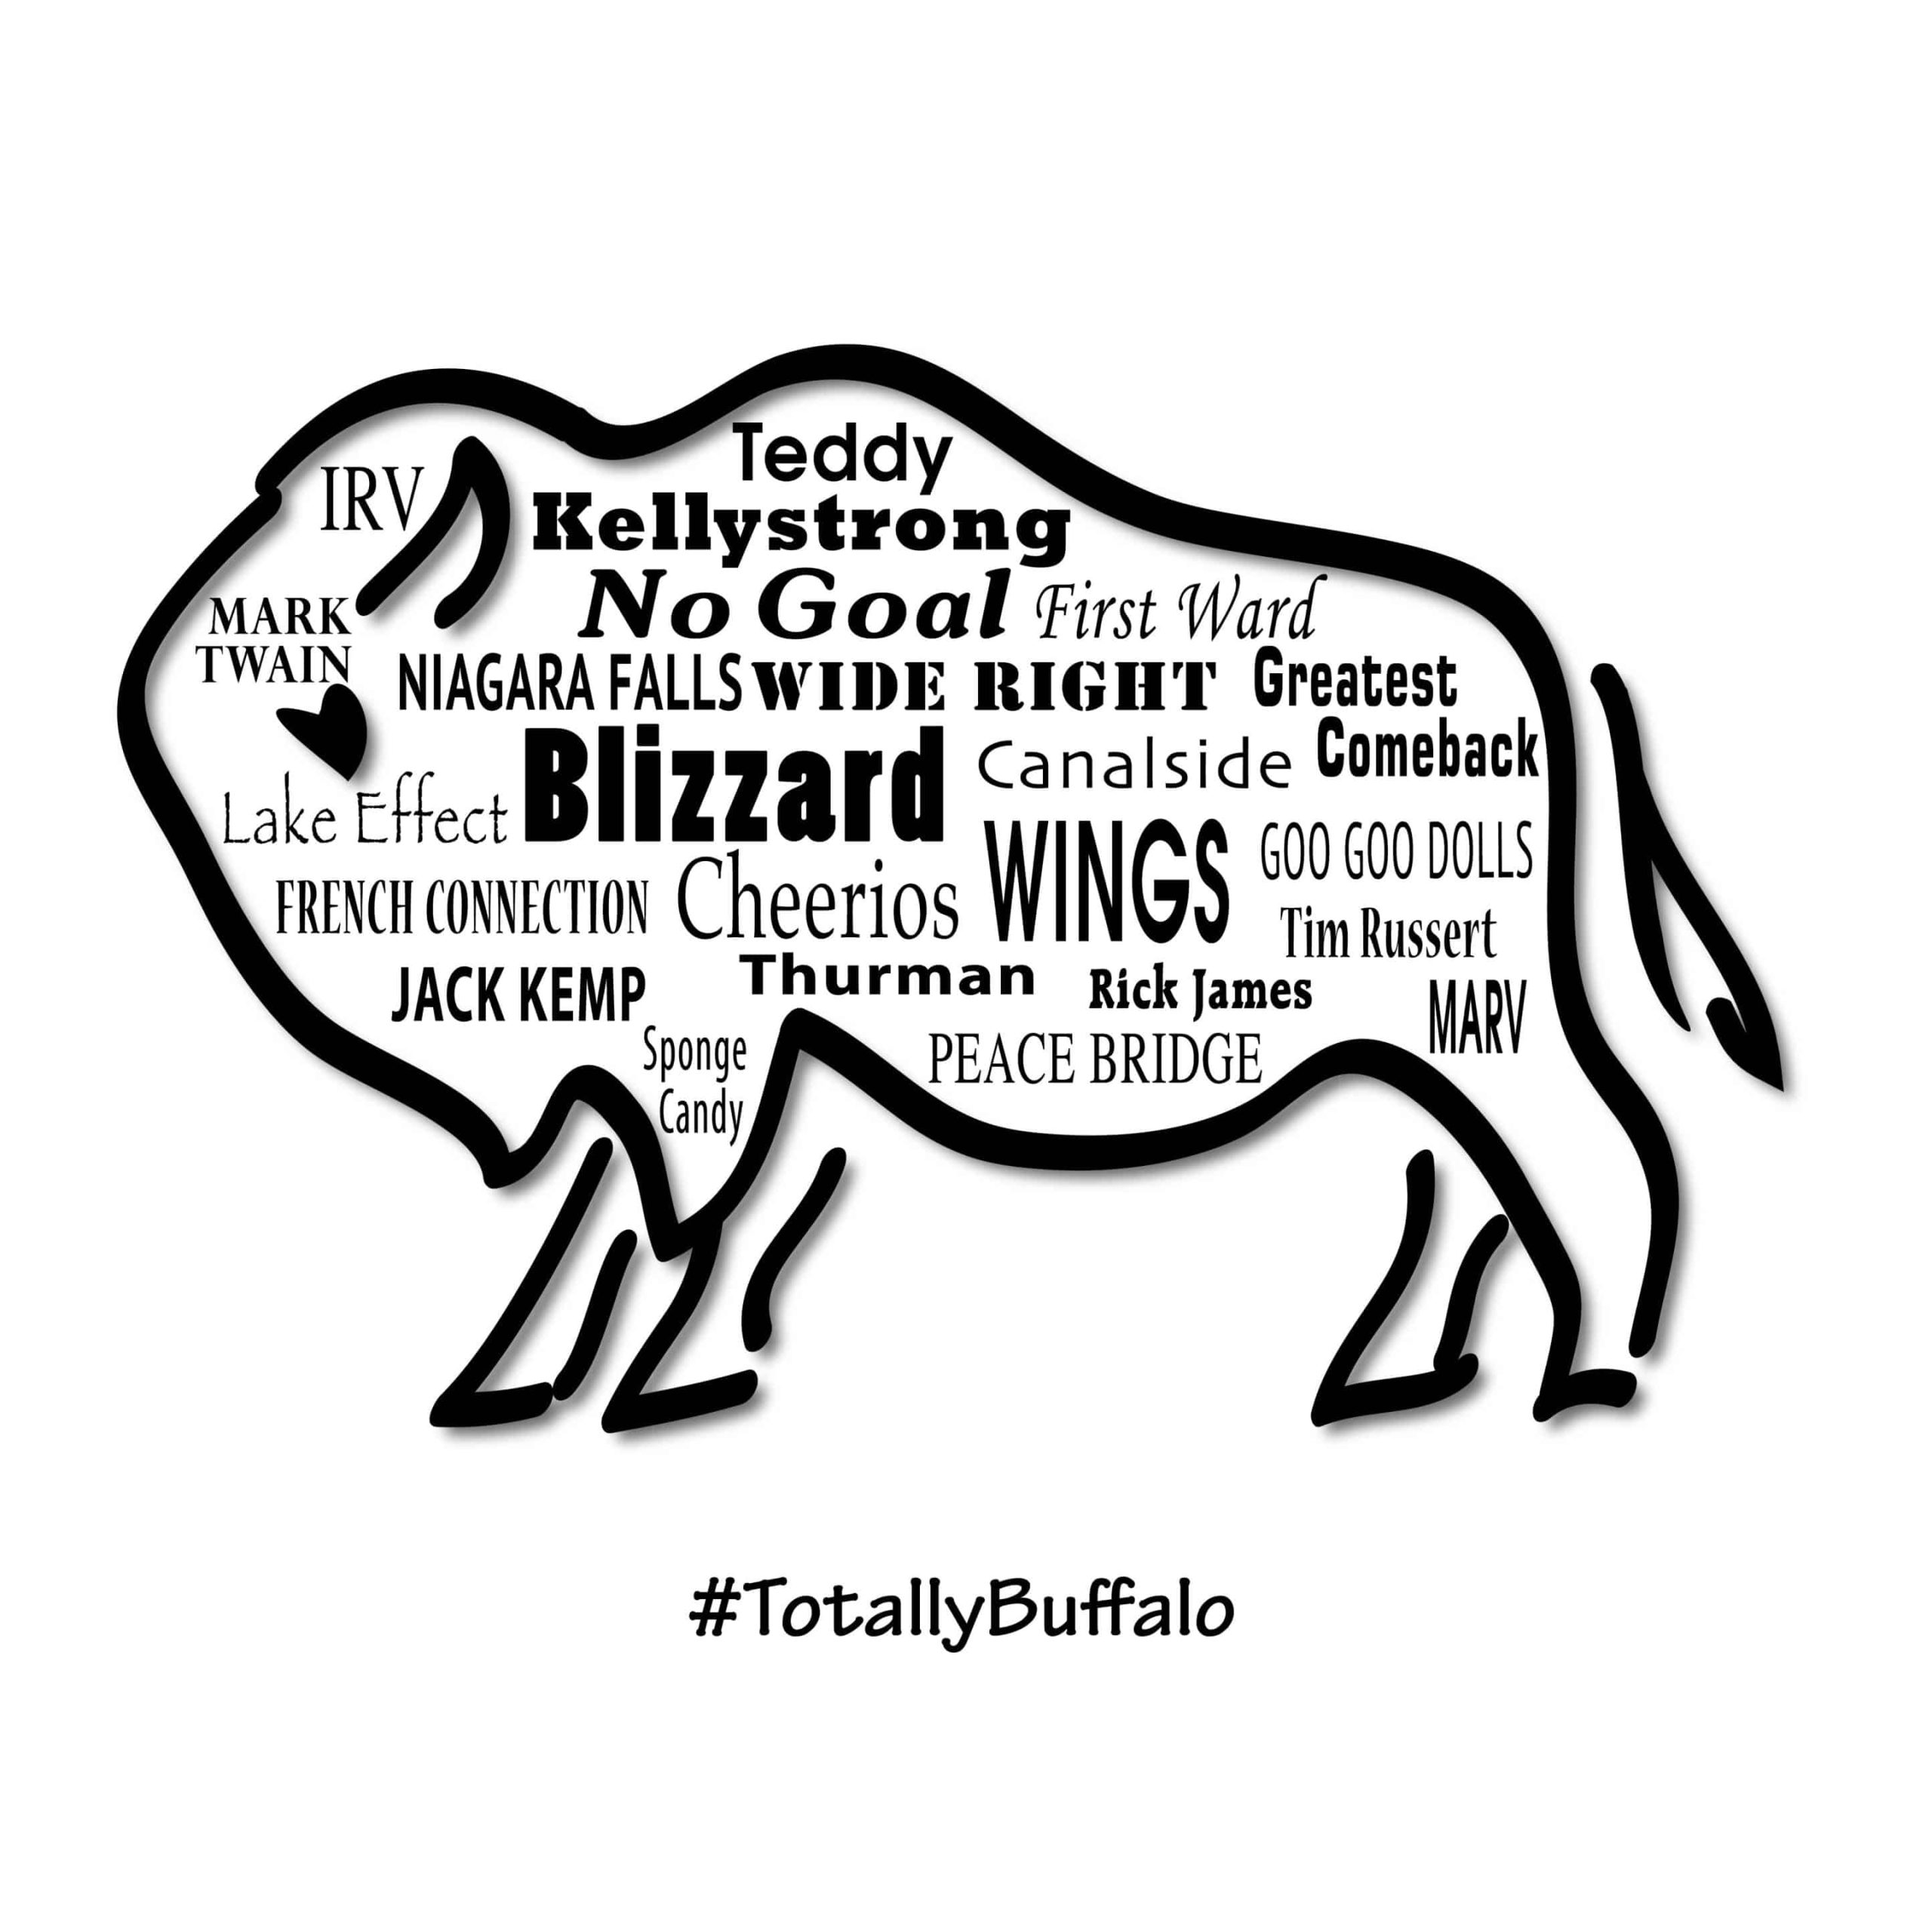 The Totally Buffalo Festival – we’re getting close!!